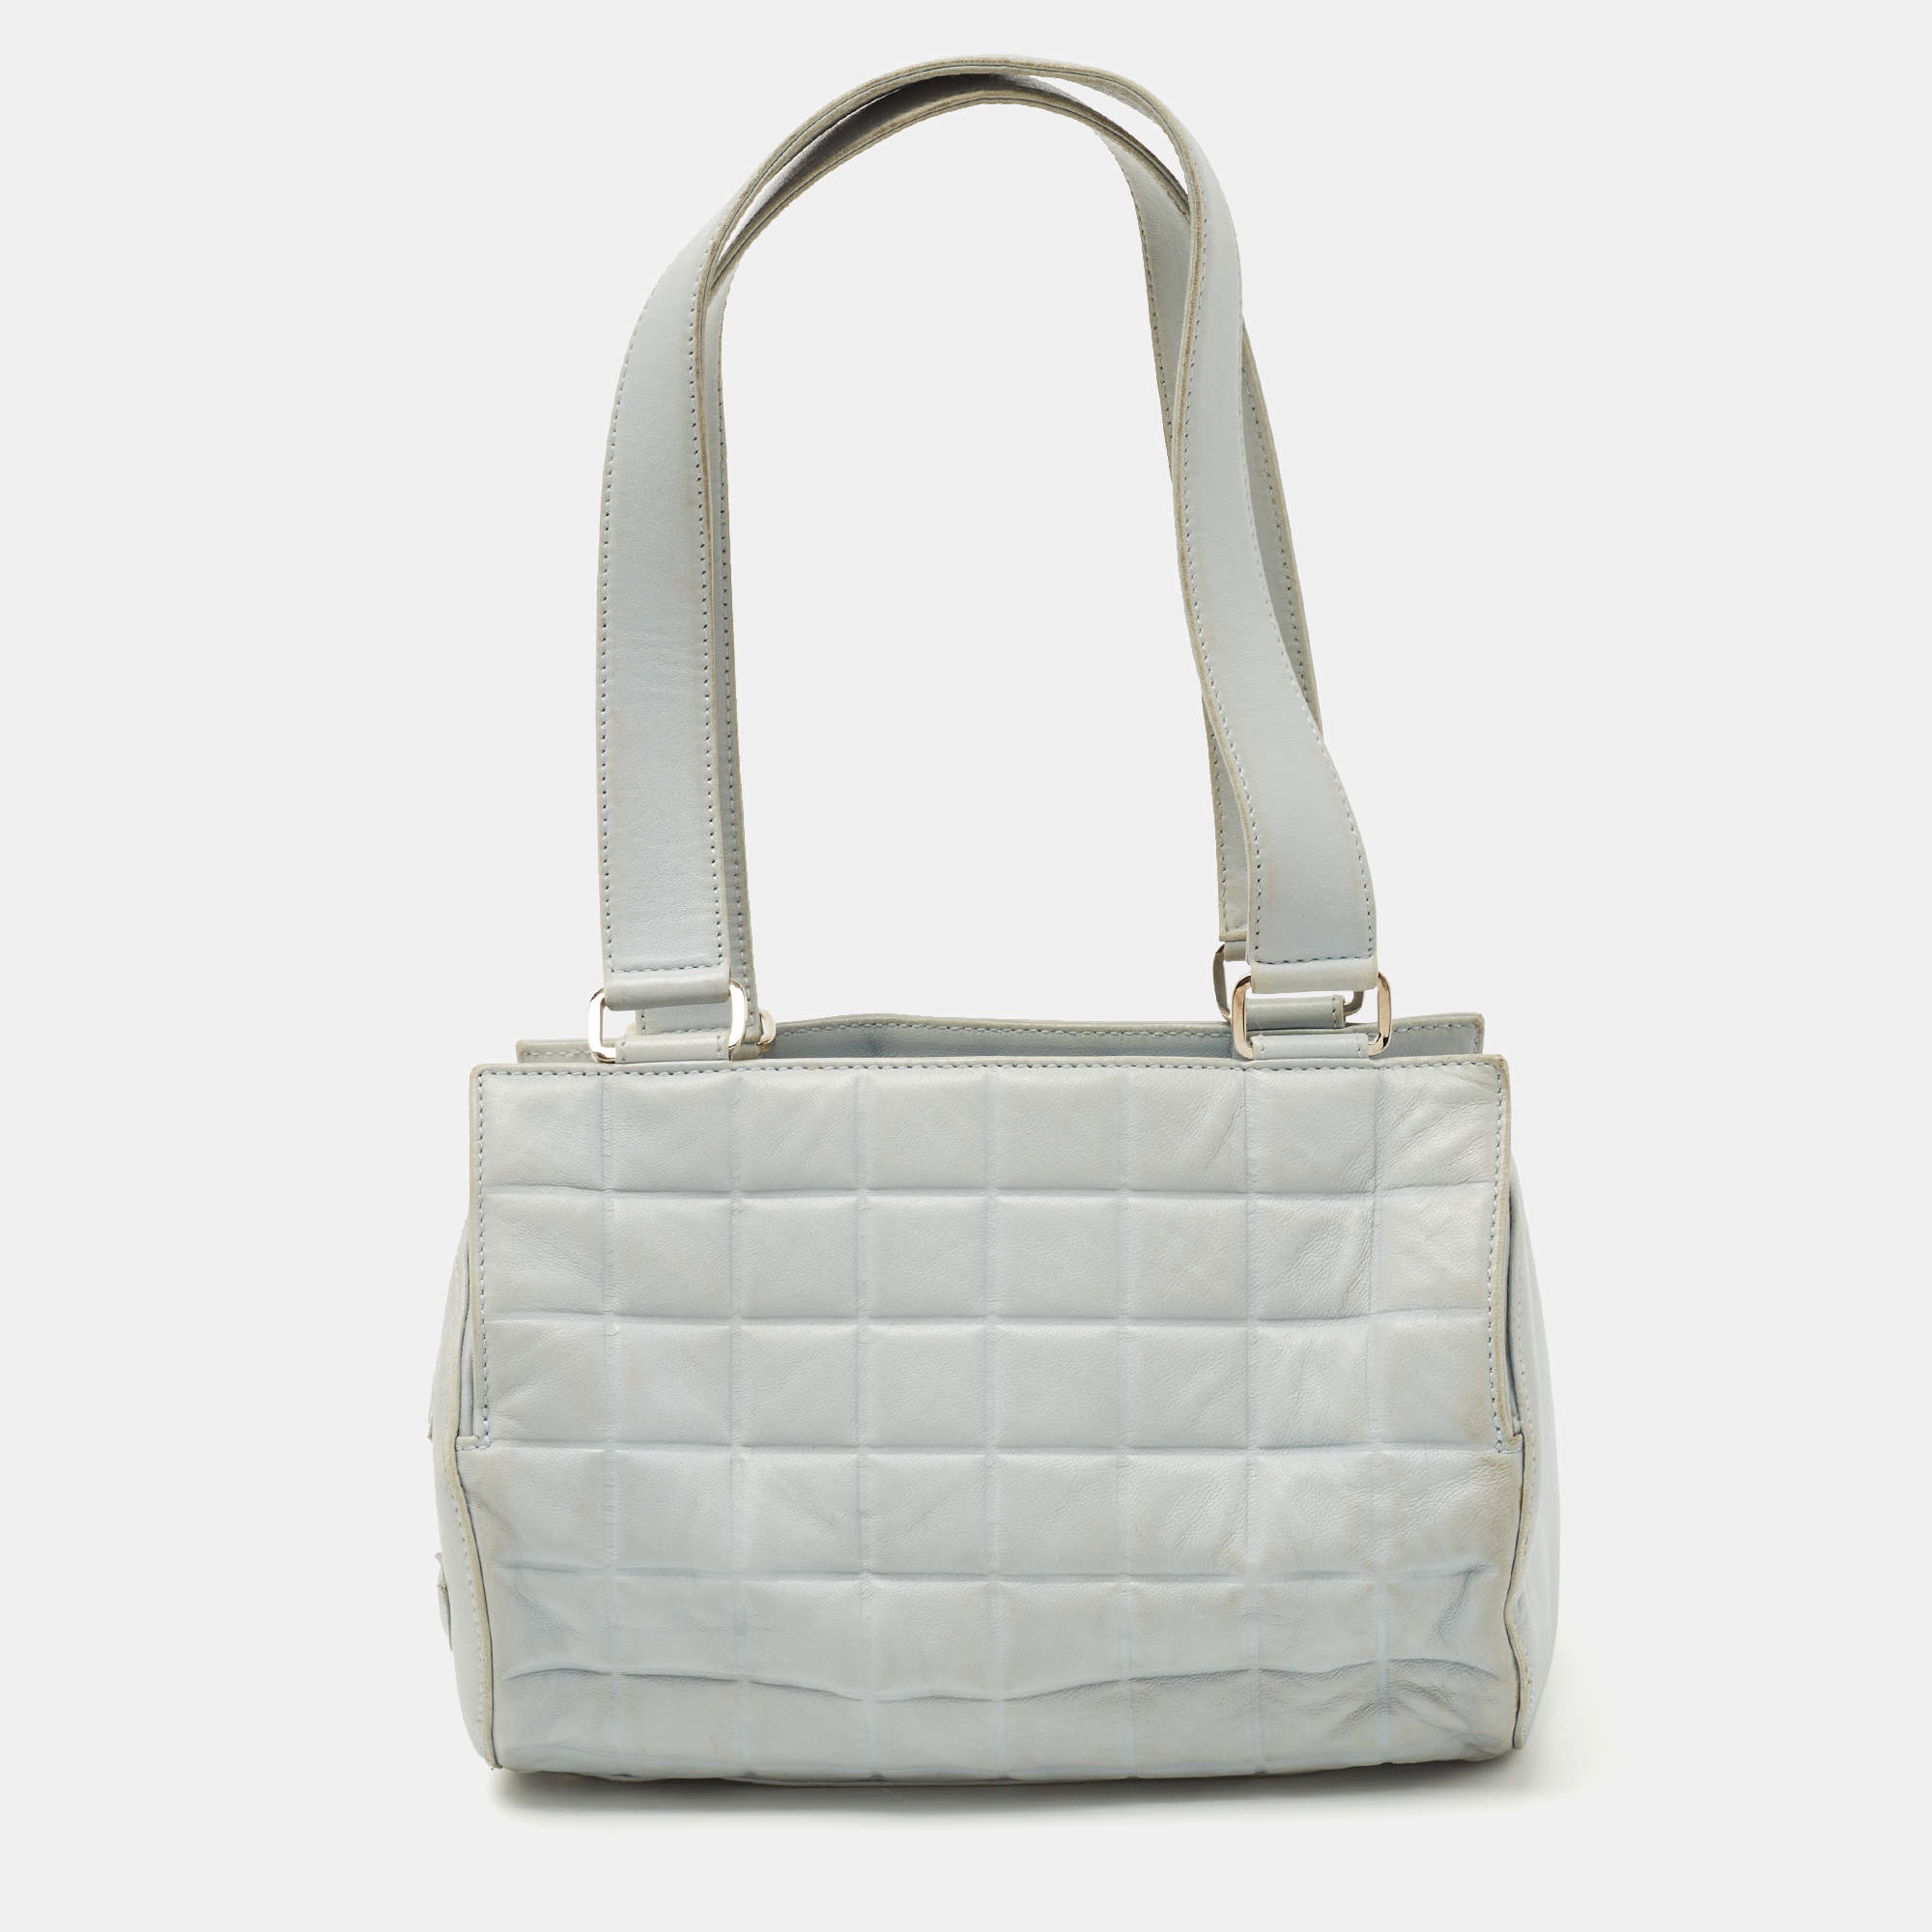 Chanel Light Blue Cube Quilted Leather Zip Bowler Bag Chanel